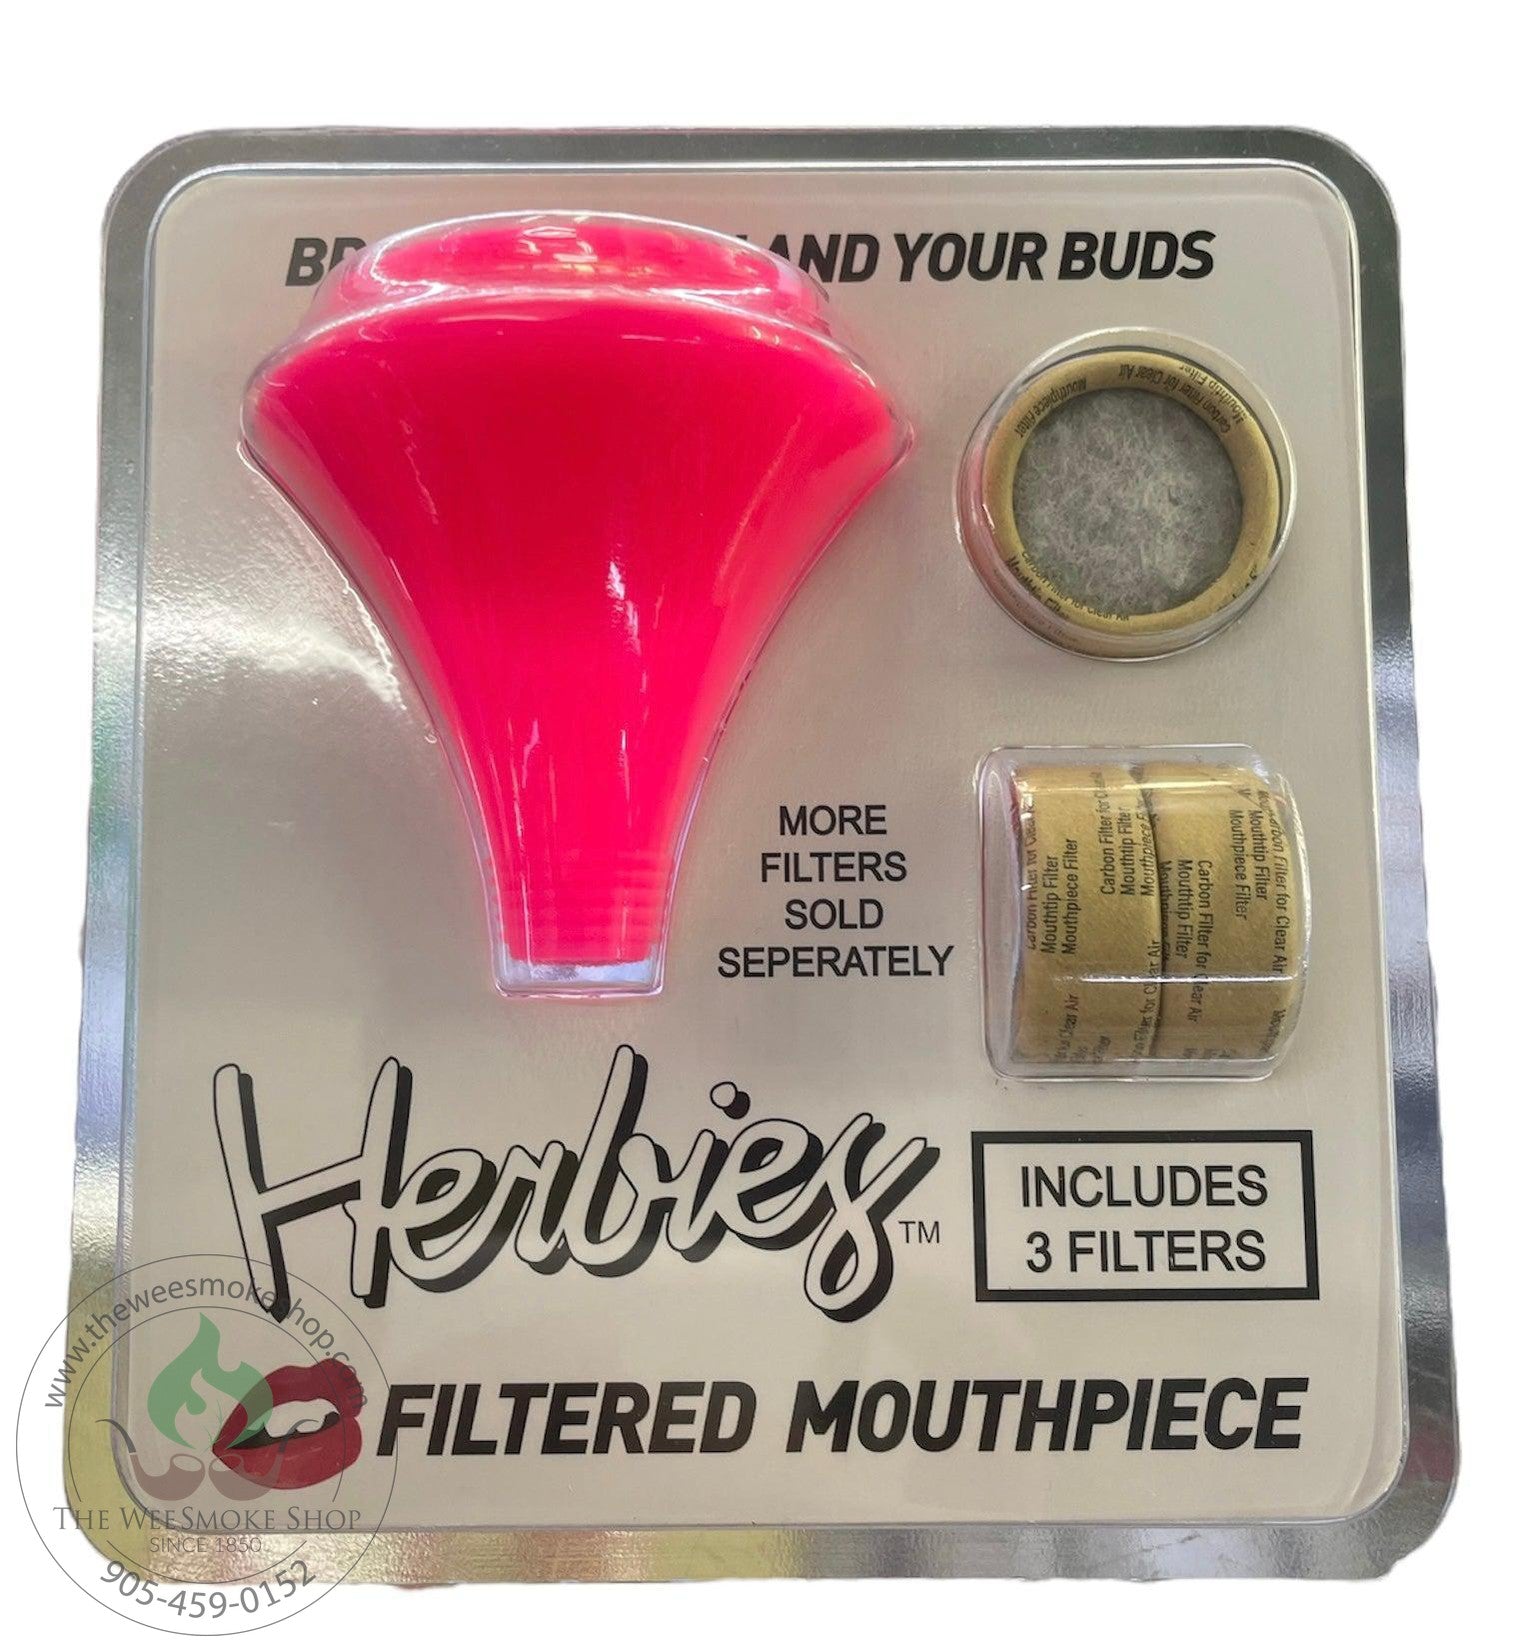 Herbies Filtered Mouthpiece - Pink - The Wee Smoke Shop